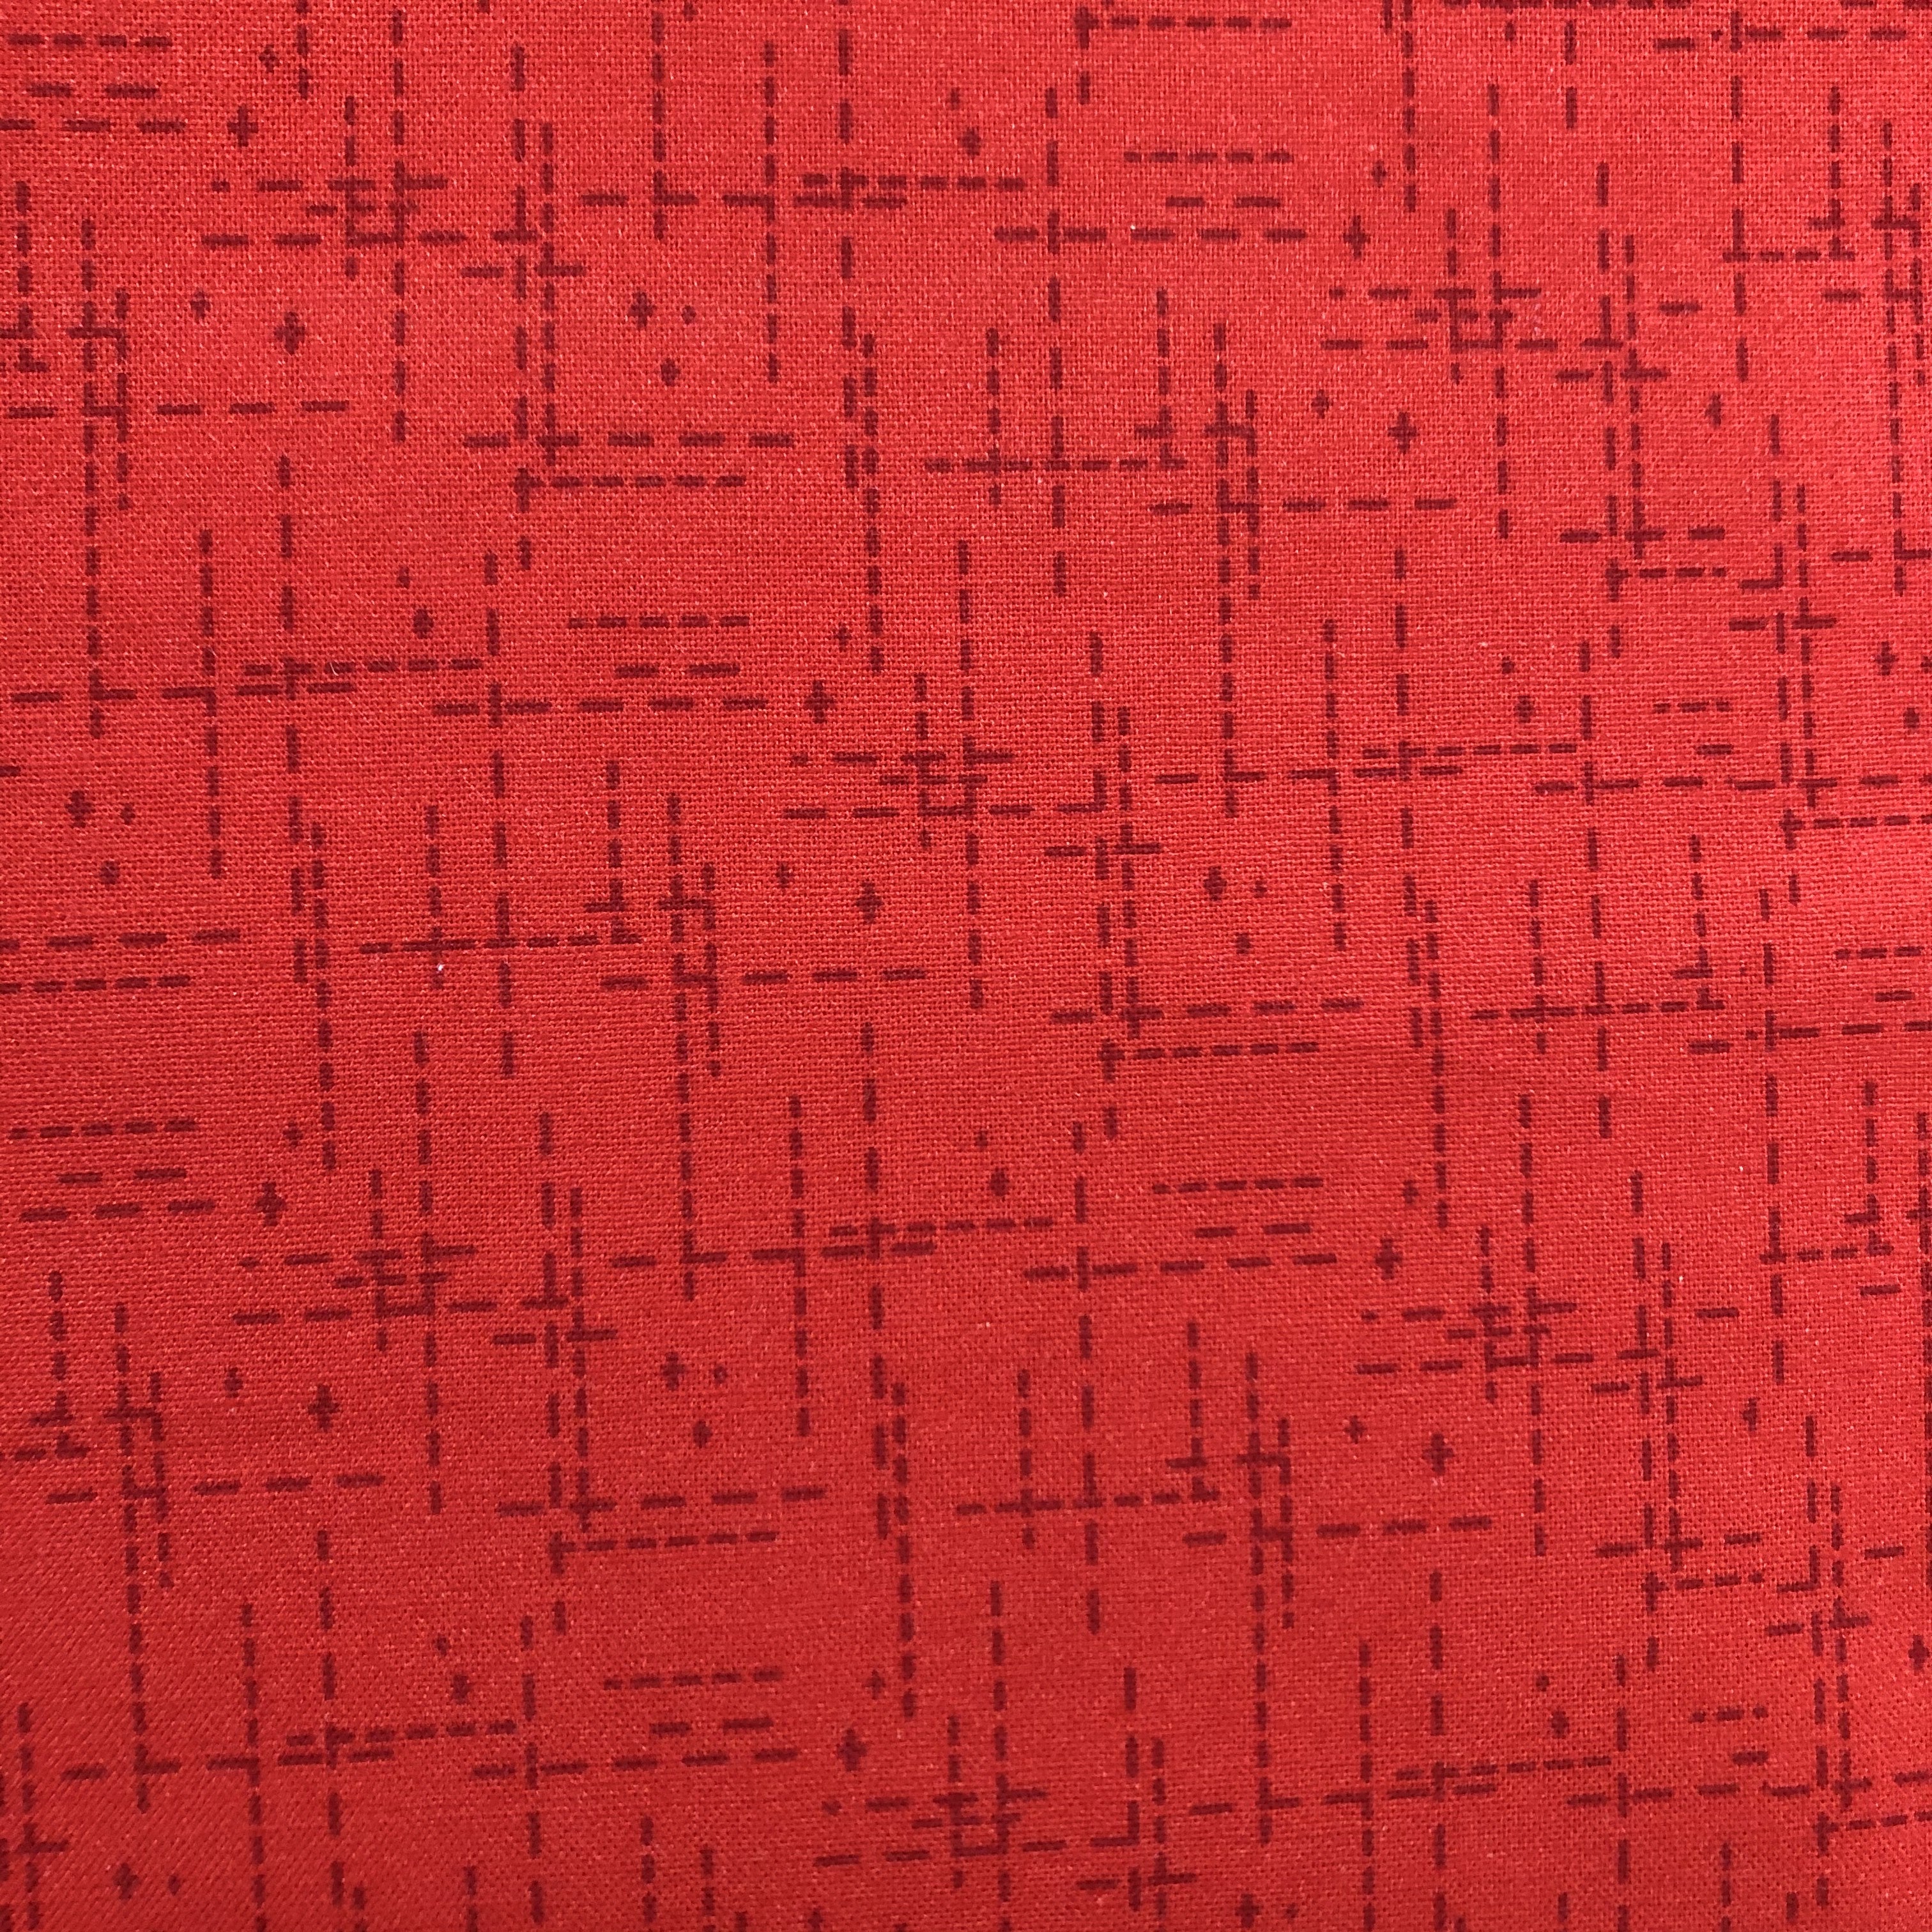 Stitched Red Fabric